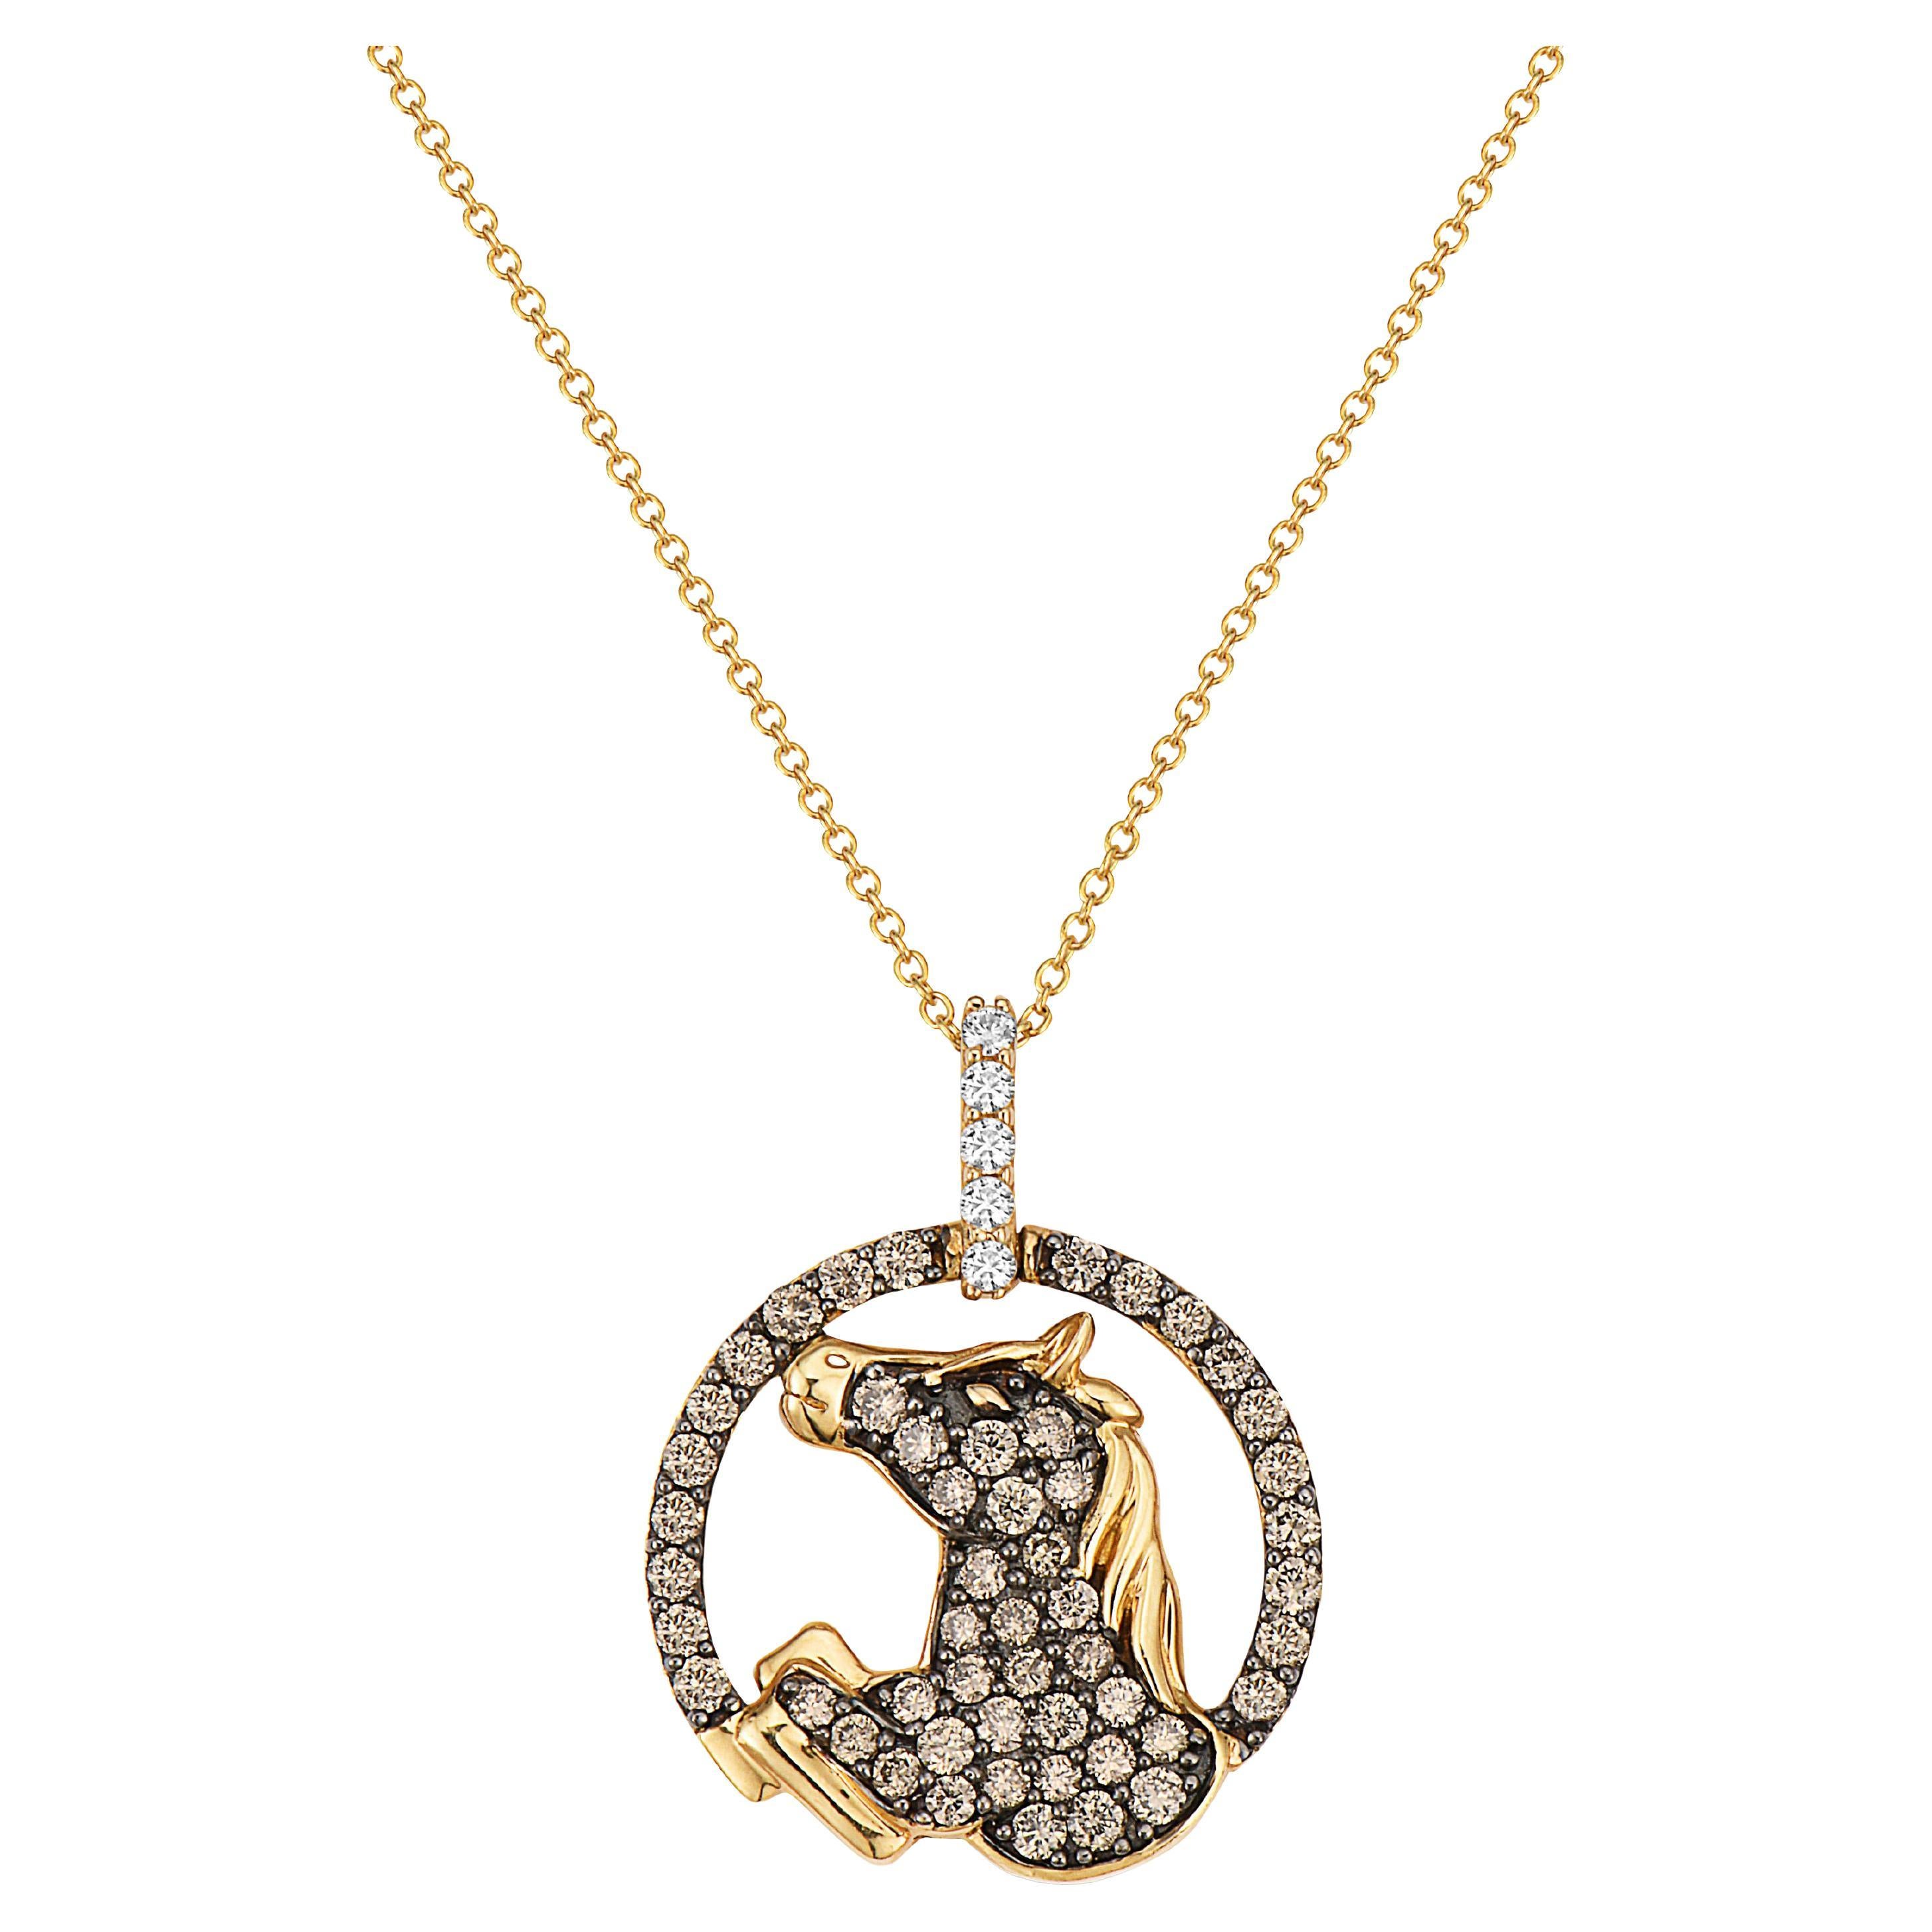 LeVian Round Chocolate Diamonds White Diamond Pendant in 14K Gold 1 Cts For Sale